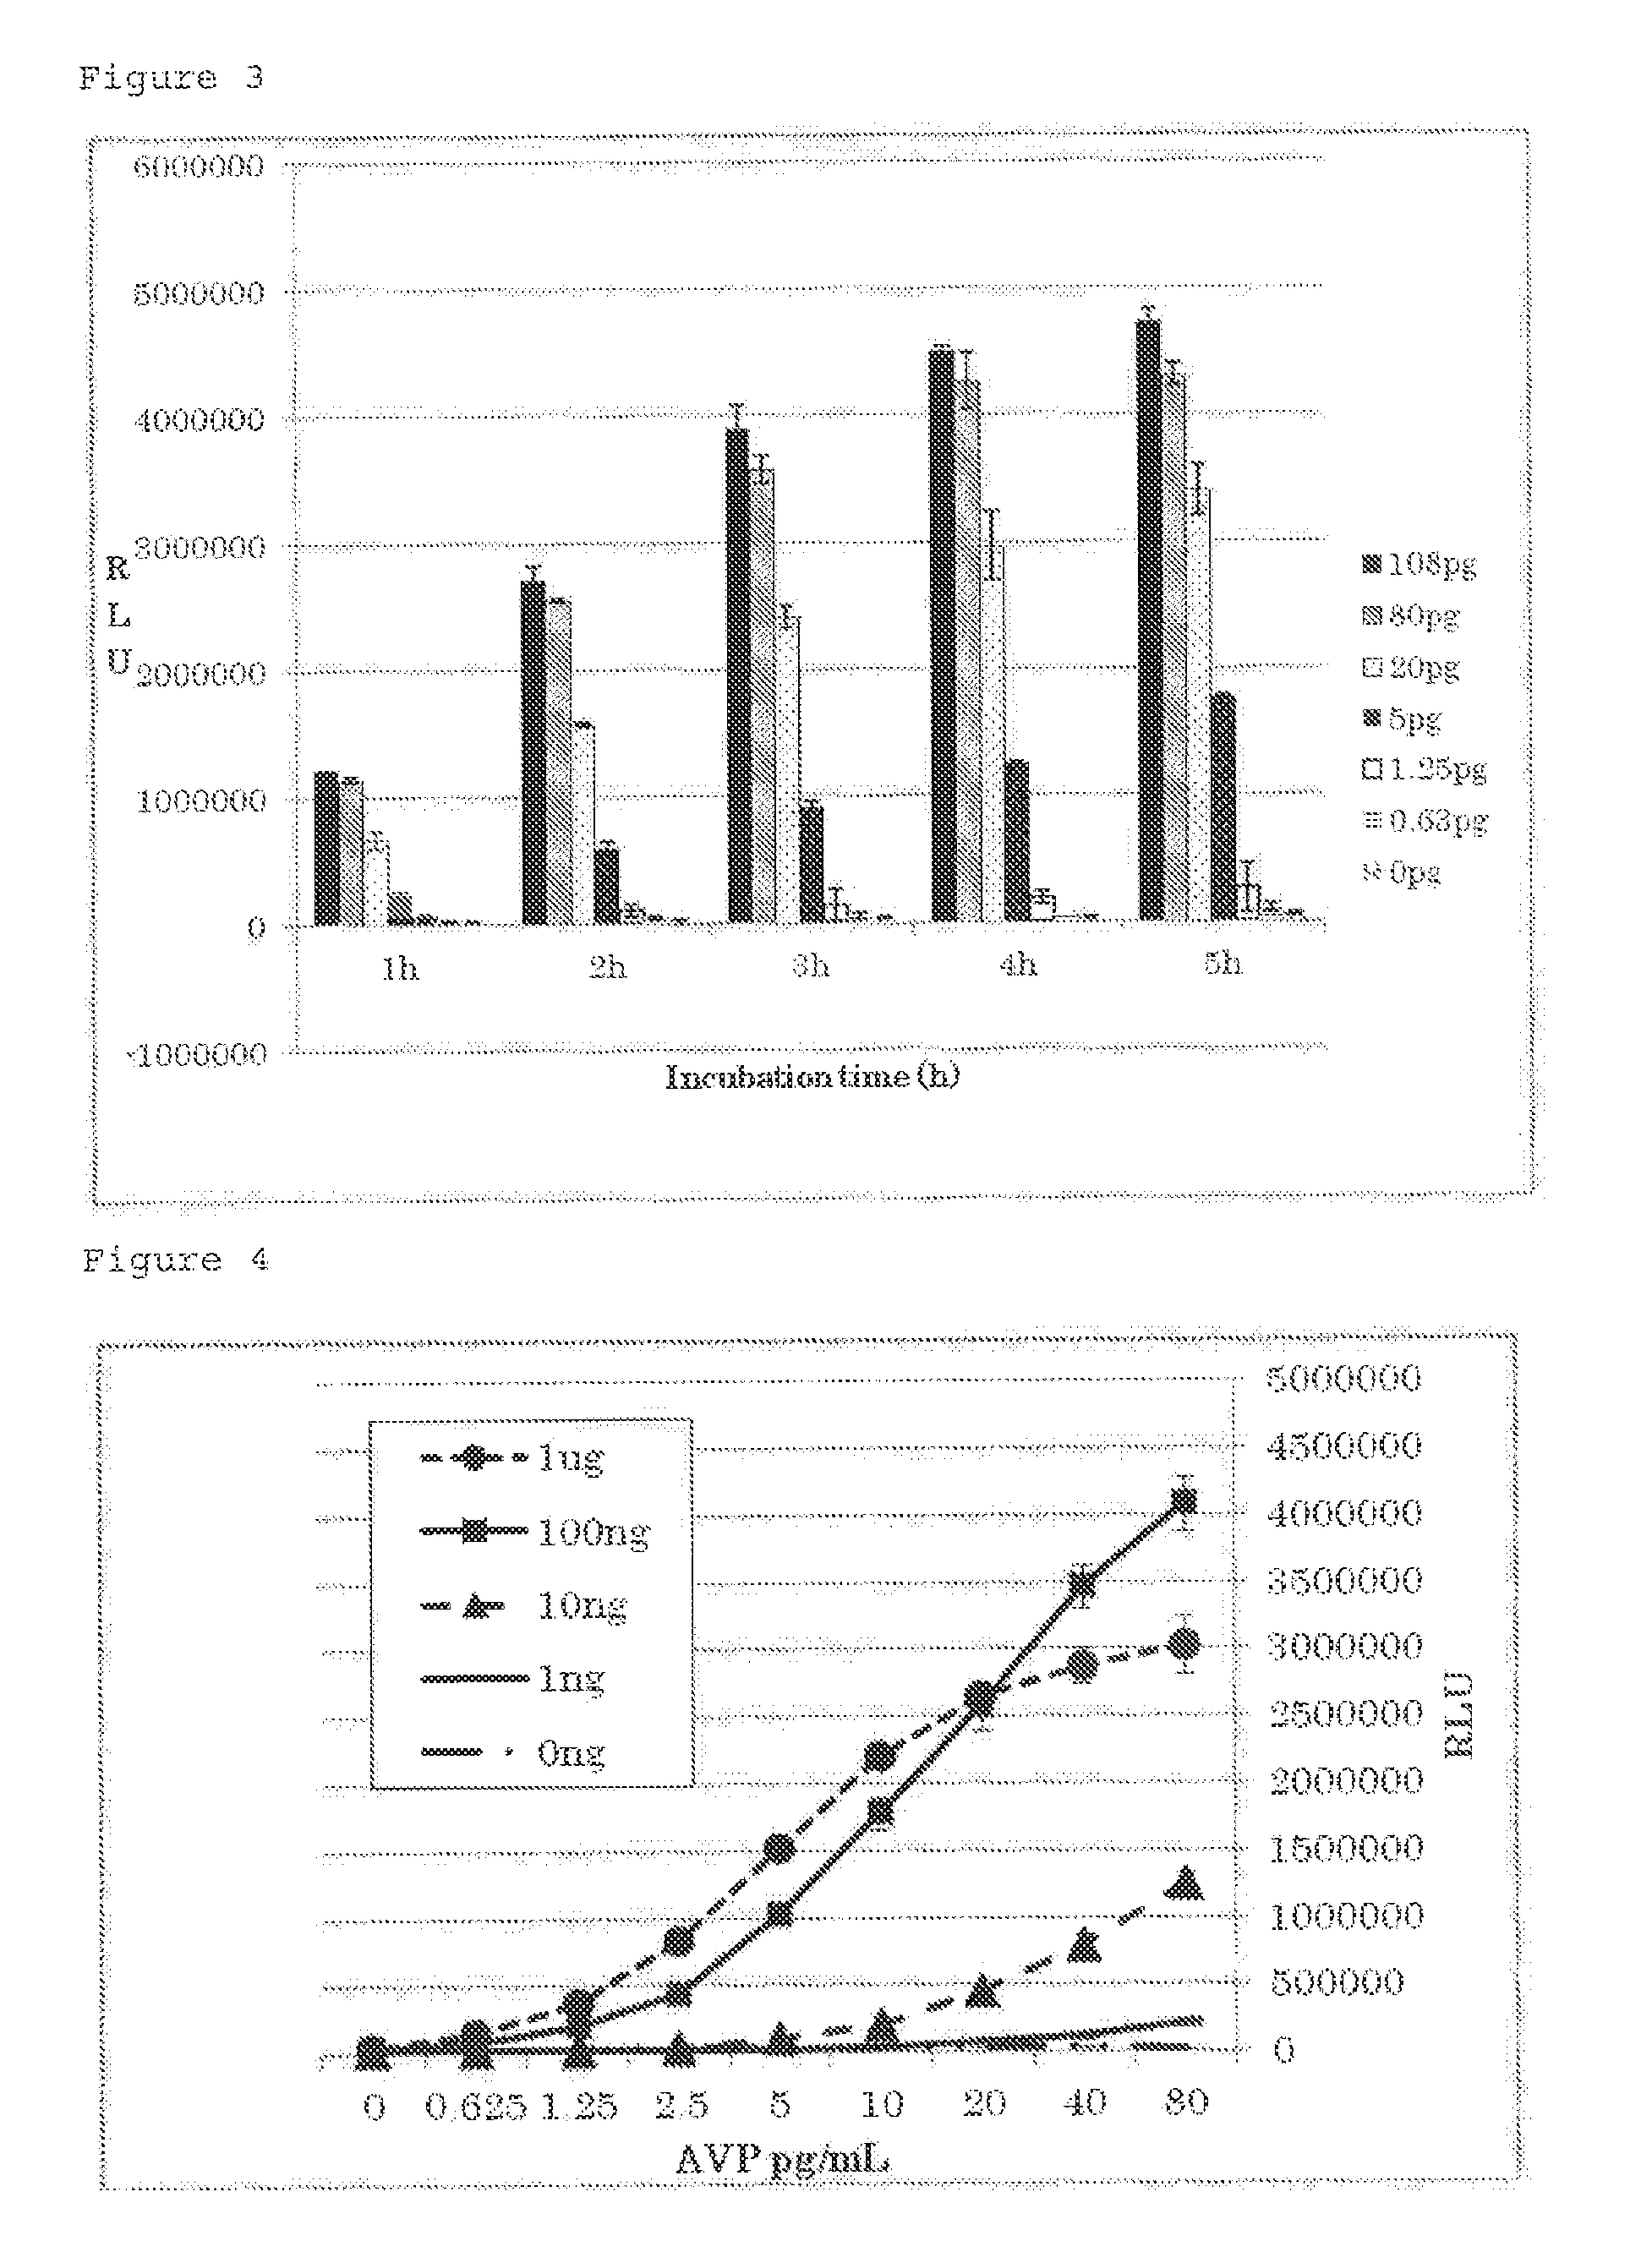 Bioassay method for detecting physiologically active substance